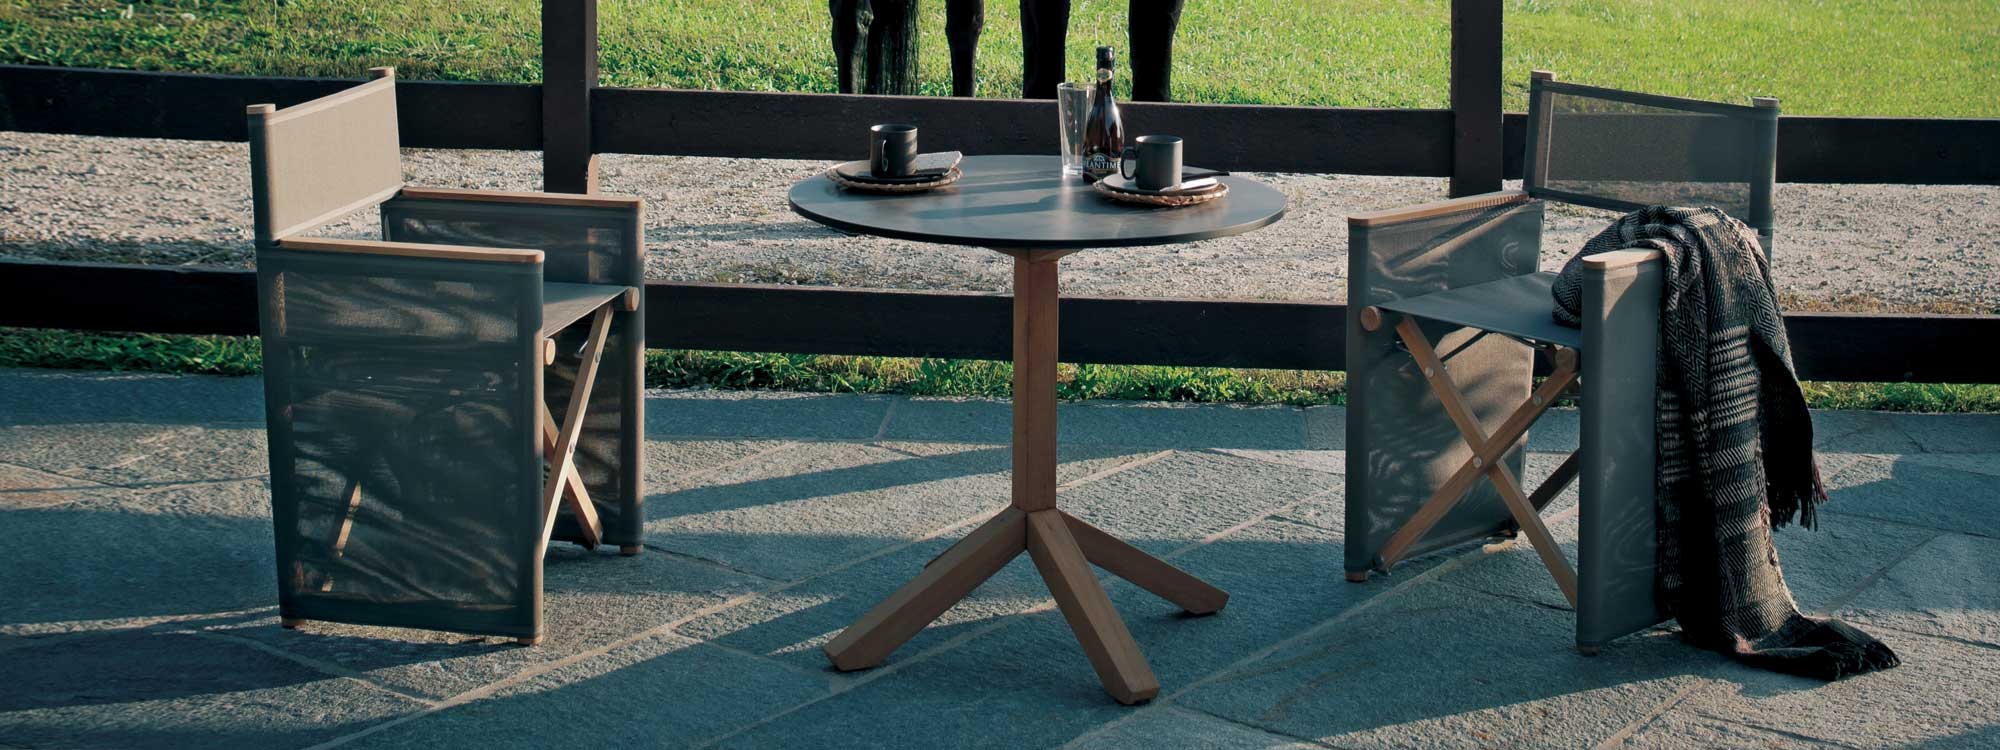 Root modern garden tables include stylish exterior low tables & small garden dining tables by Roda modern teak furniture company.